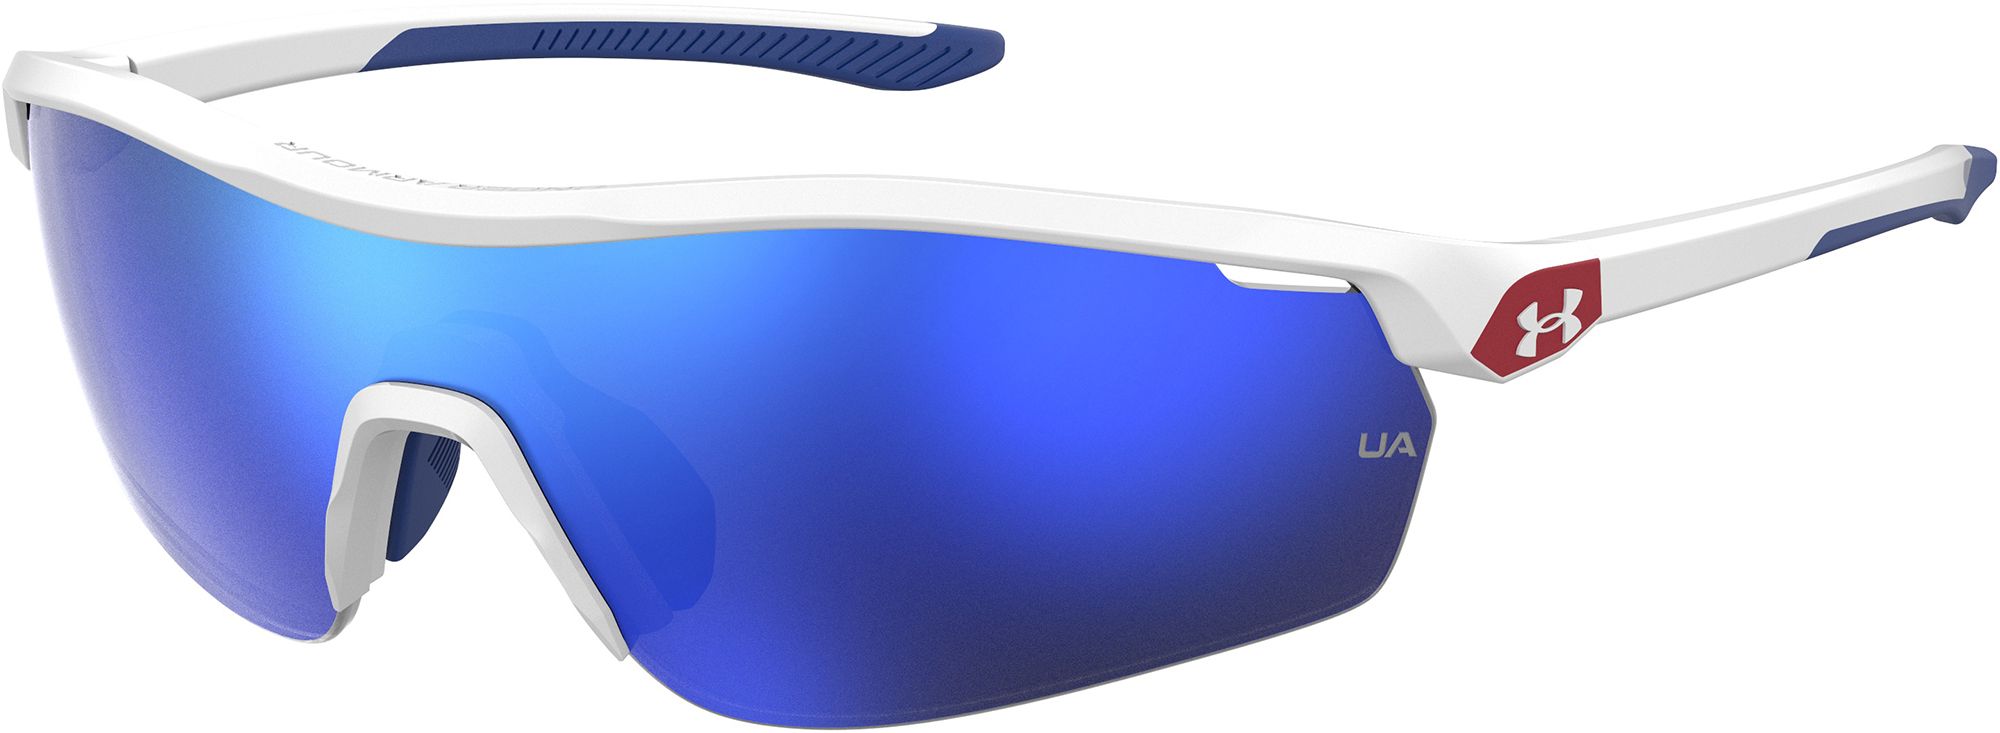 Under Armour Gametime Jr. Tuned Baseball Sunglasses Accessories Under Armour Solid White/Royal Tip/Baseball Tuned Blue Mirror  